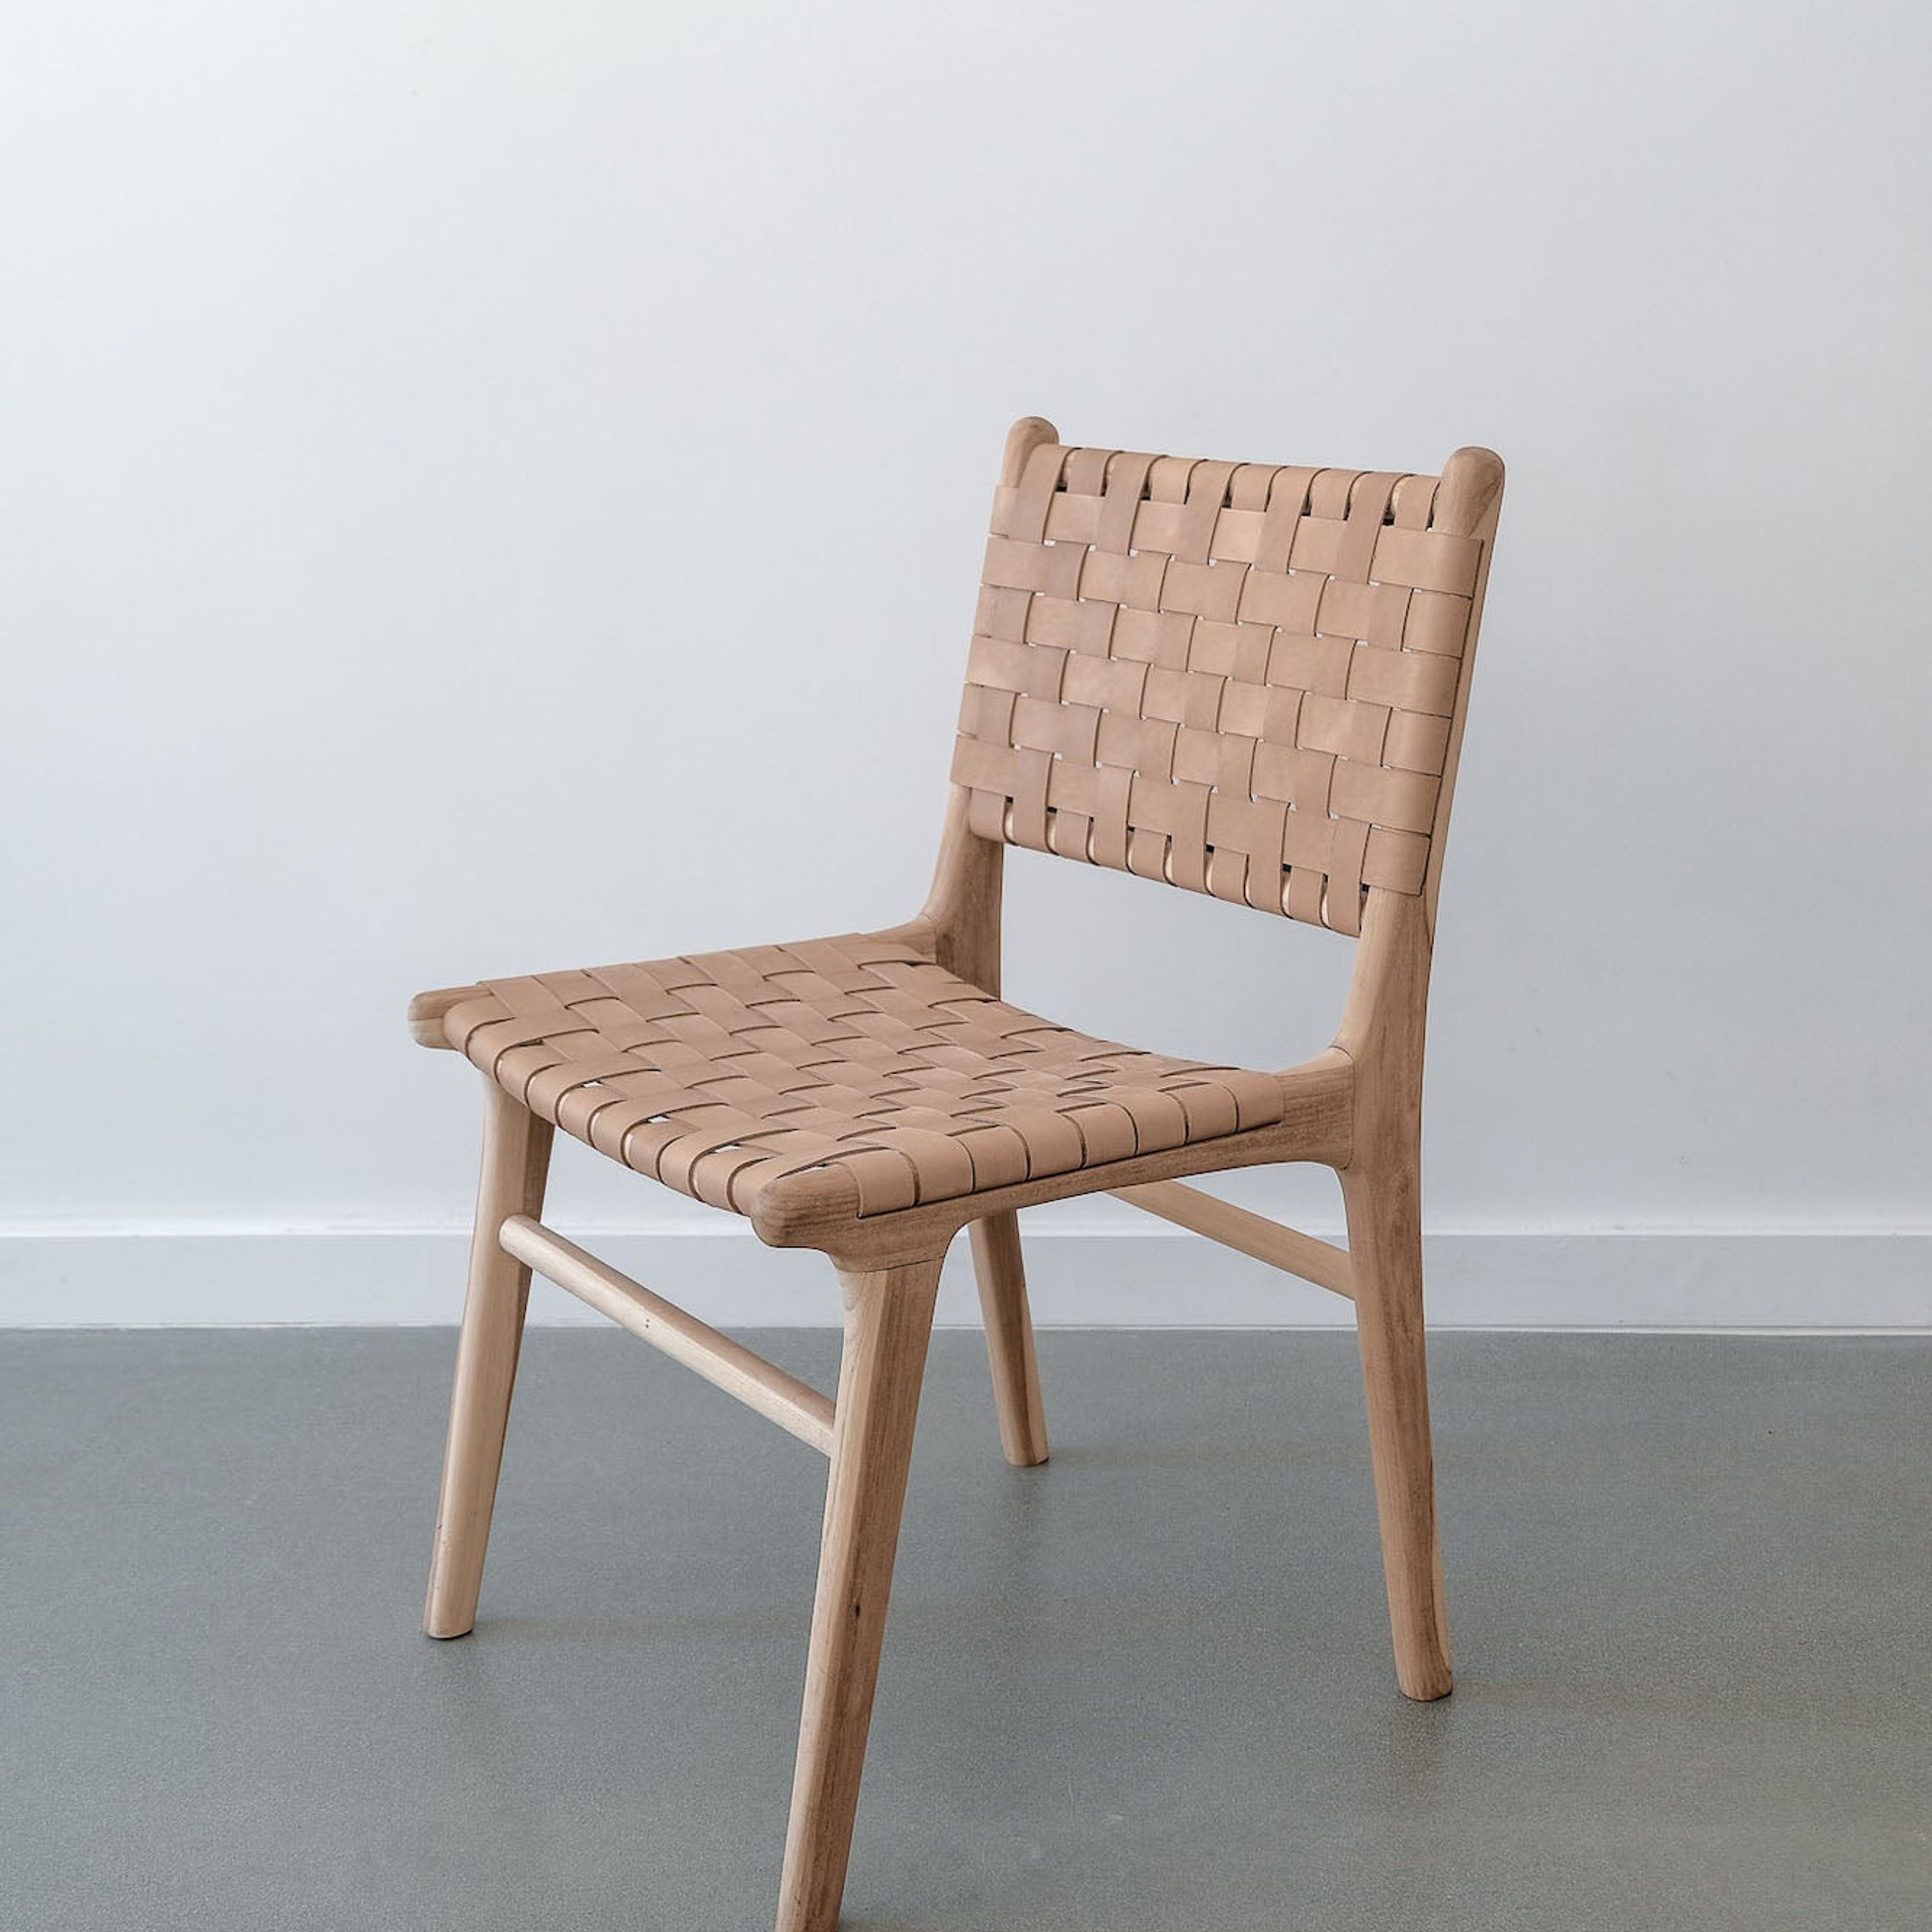 Woven Leather Dining Chair - Beige